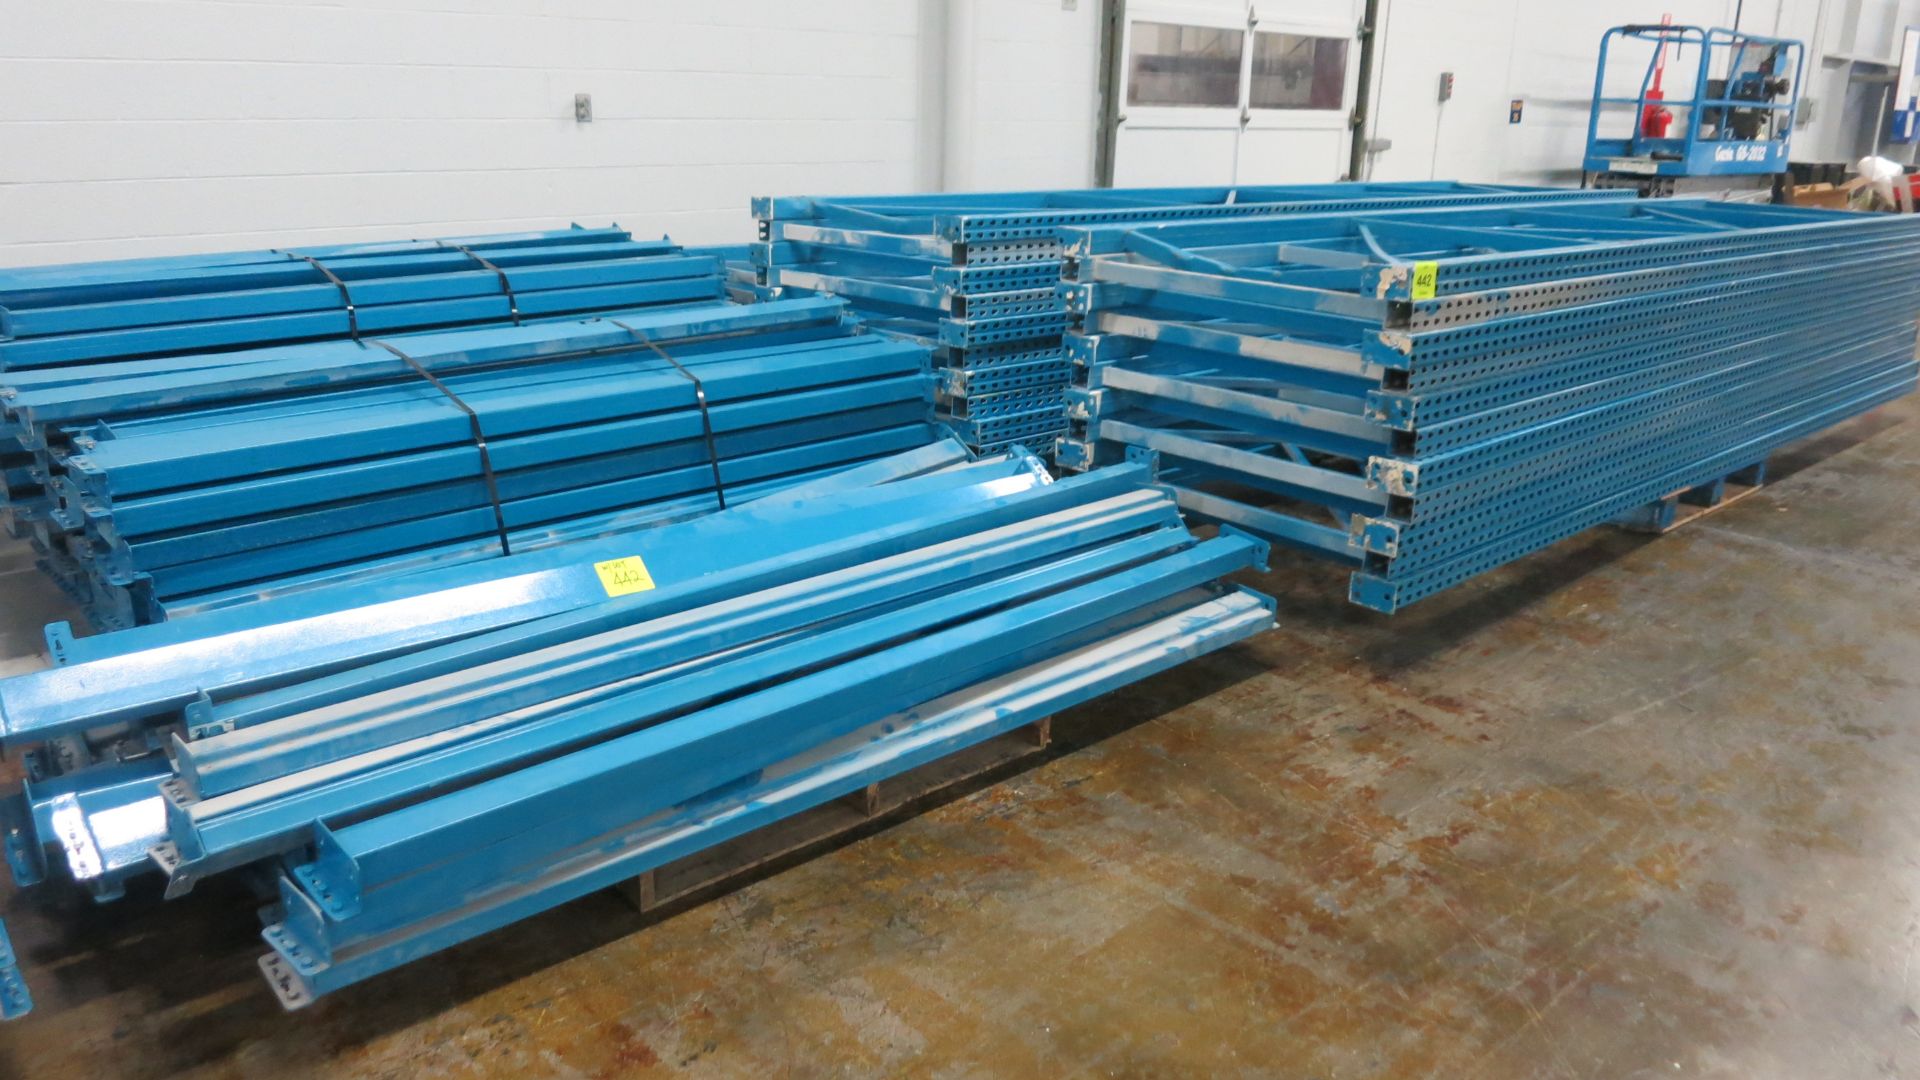 [Lot] 27-Sections pallet racks, with (29) uprights x 16', (135) cross beams x 8 ' (disassemble ready